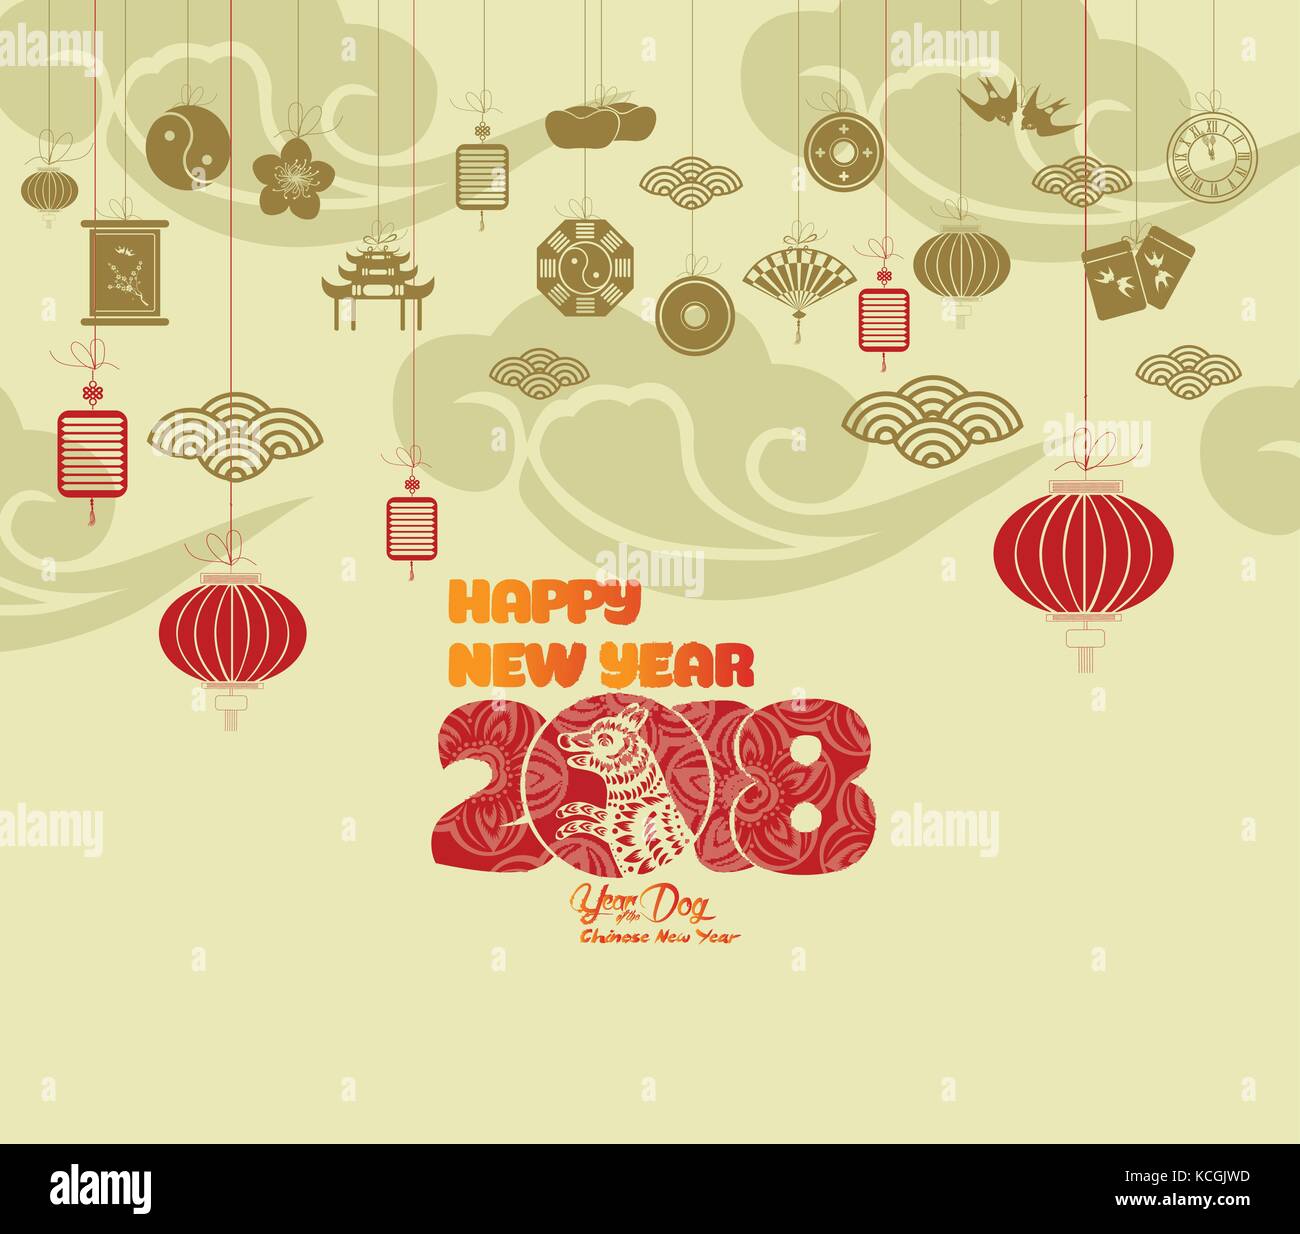 Oriental Happy Chinese New Year 2018. Year of the dog Stock Vector